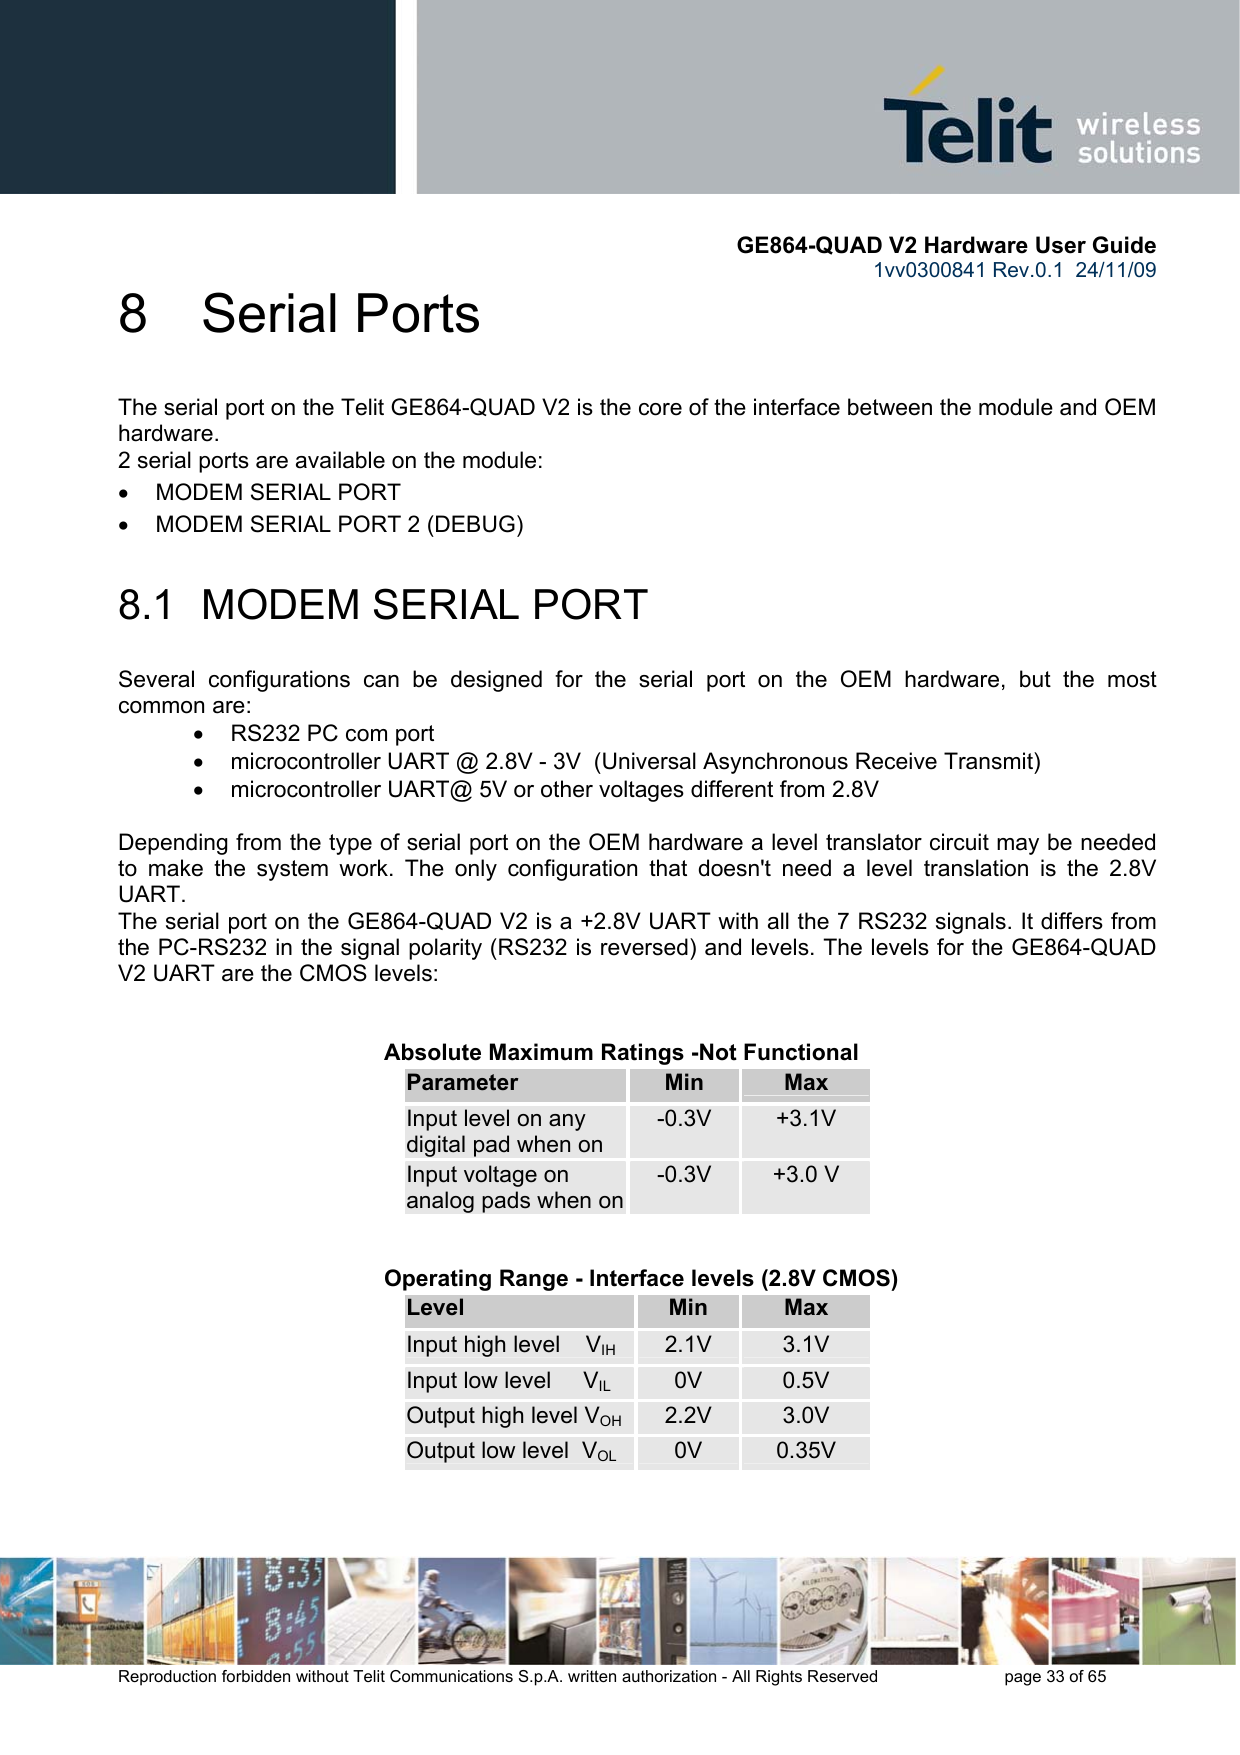       GE864-QUAD V2 Hardware User Guide 1vv0300841 Rev.0.1  24/11/09      Reproduction forbidden without Telit Communications S.p.A. written authorization - All Rights Reserved    page 33 of 65  8  Serial Ports The serial port on the Telit GE864-QUAD V2 is the core of the interface between the module and OEM hardware.  2 serial ports are available on the module: •  MODEM SERIAL PORT •  MODEM SERIAL PORT 2 (DEBUG)  8.1  MODEM SERIAL PORT Several configurations can be designed for the serial port on the OEM hardware, but the most common are: •  RS232 PC com port •  microcontroller UART @ 2.8V - 3V  (Universal Asynchronous Receive Transmit)  •  microcontroller UART@ 5V or other voltages different from 2.8V   Depending from the type of serial port on the OEM hardware a level translator circuit may be needed to make the system work. The only configuration that doesn&apos;t need a level translation is the 2.8V UART. The serial port on the GE864-QUAD V2 is a +2.8V UART with all the 7 RS232 signals. It differs from the PC-RS232 in the signal polarity (RS232 is reversed) and levels. The levels for the GE864-QUAD V2 UART are the CMOS levels:   Absolute Maximum Ratings -Not Functional Parameter  Min  Max Input level on any digital pad when on -0.3V  +3.1V Input voltage on analog pads when on-0.3V  +3.0 V      Operating Range - Interface levels (2.8V CMOS) Level  Min  Max Input high level    VIH  2.1V  3.1V Input low level     VIL 0V  0.5V Output high level VOH 2.2V  3.0V Output low level  VOL 0V  0.35V   